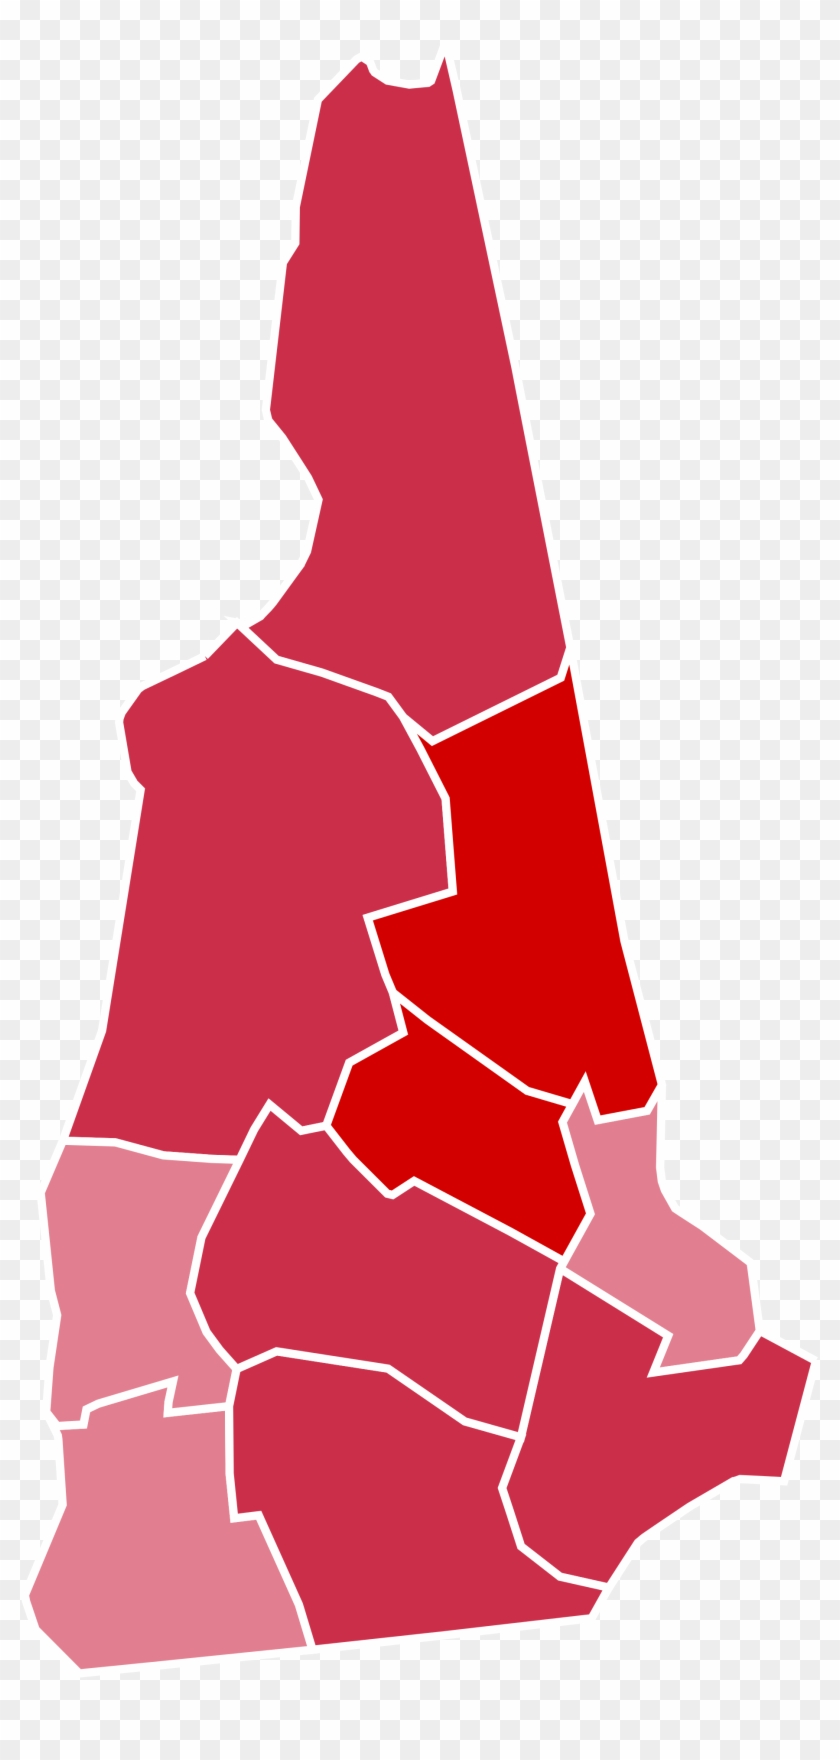 Open - New Hampshire 2016 Election Results By County #1430227